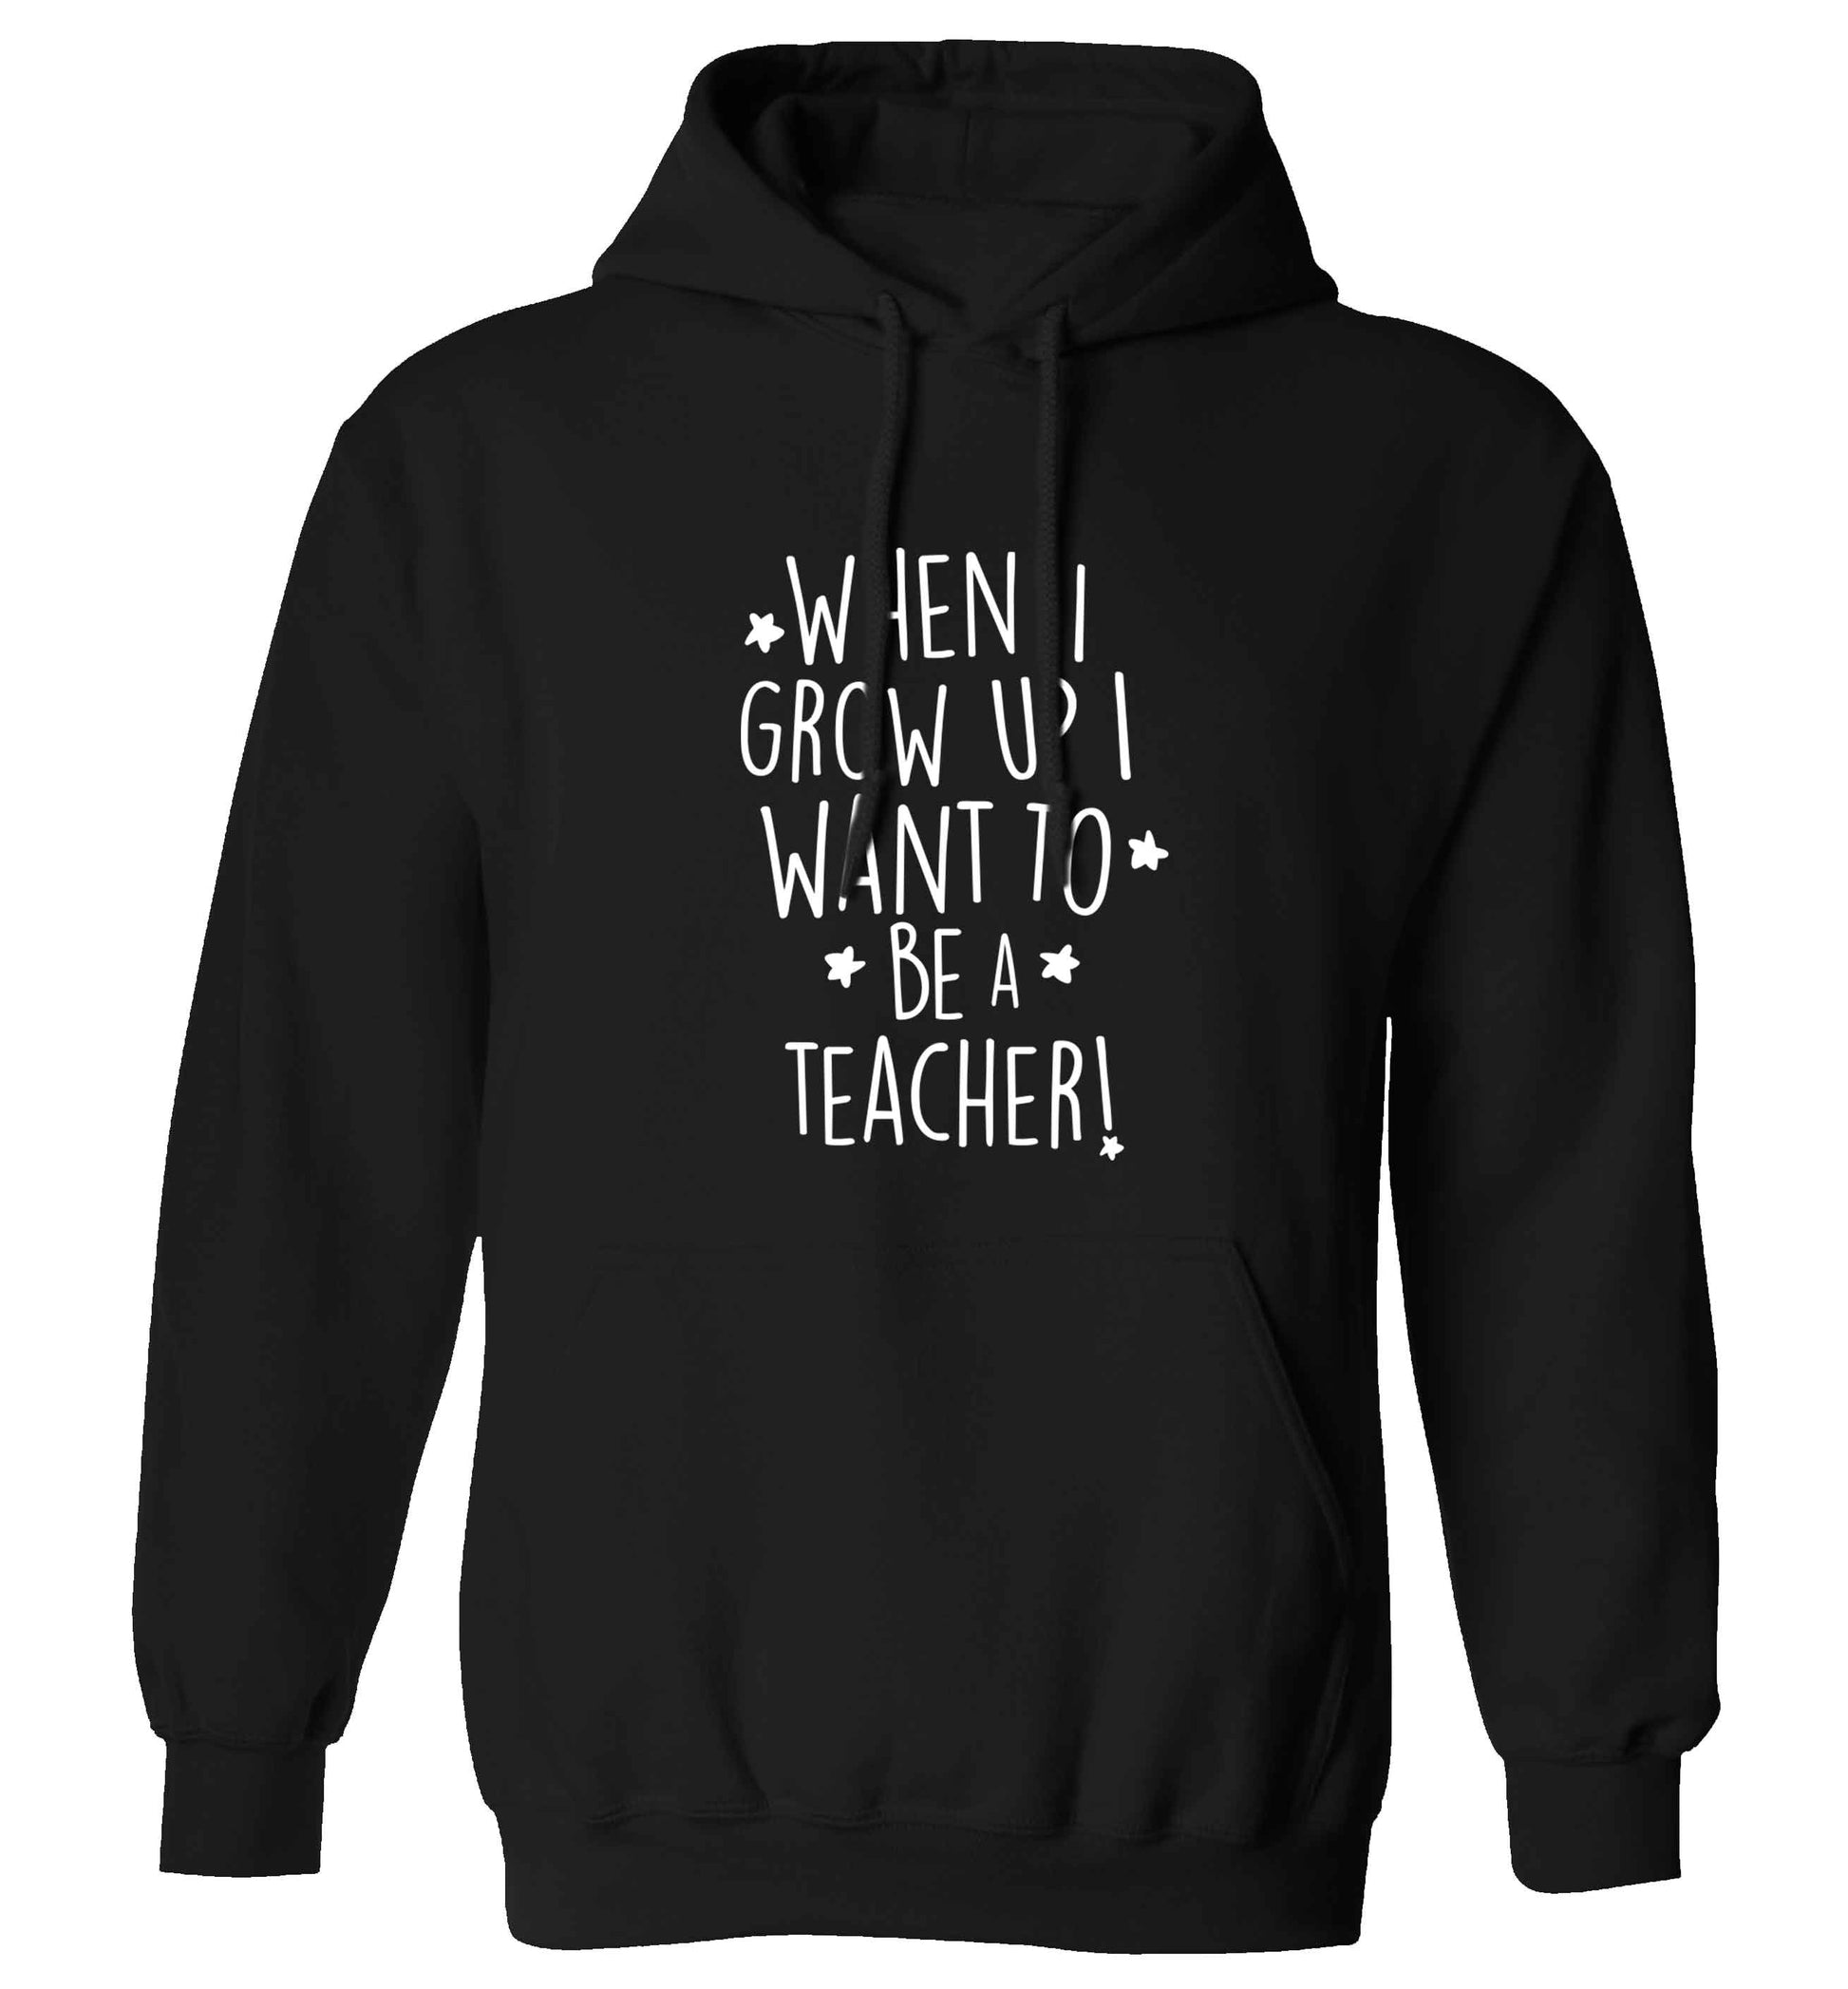 When I grow up I want to be a teacher adults unisex black hoodie 2XL